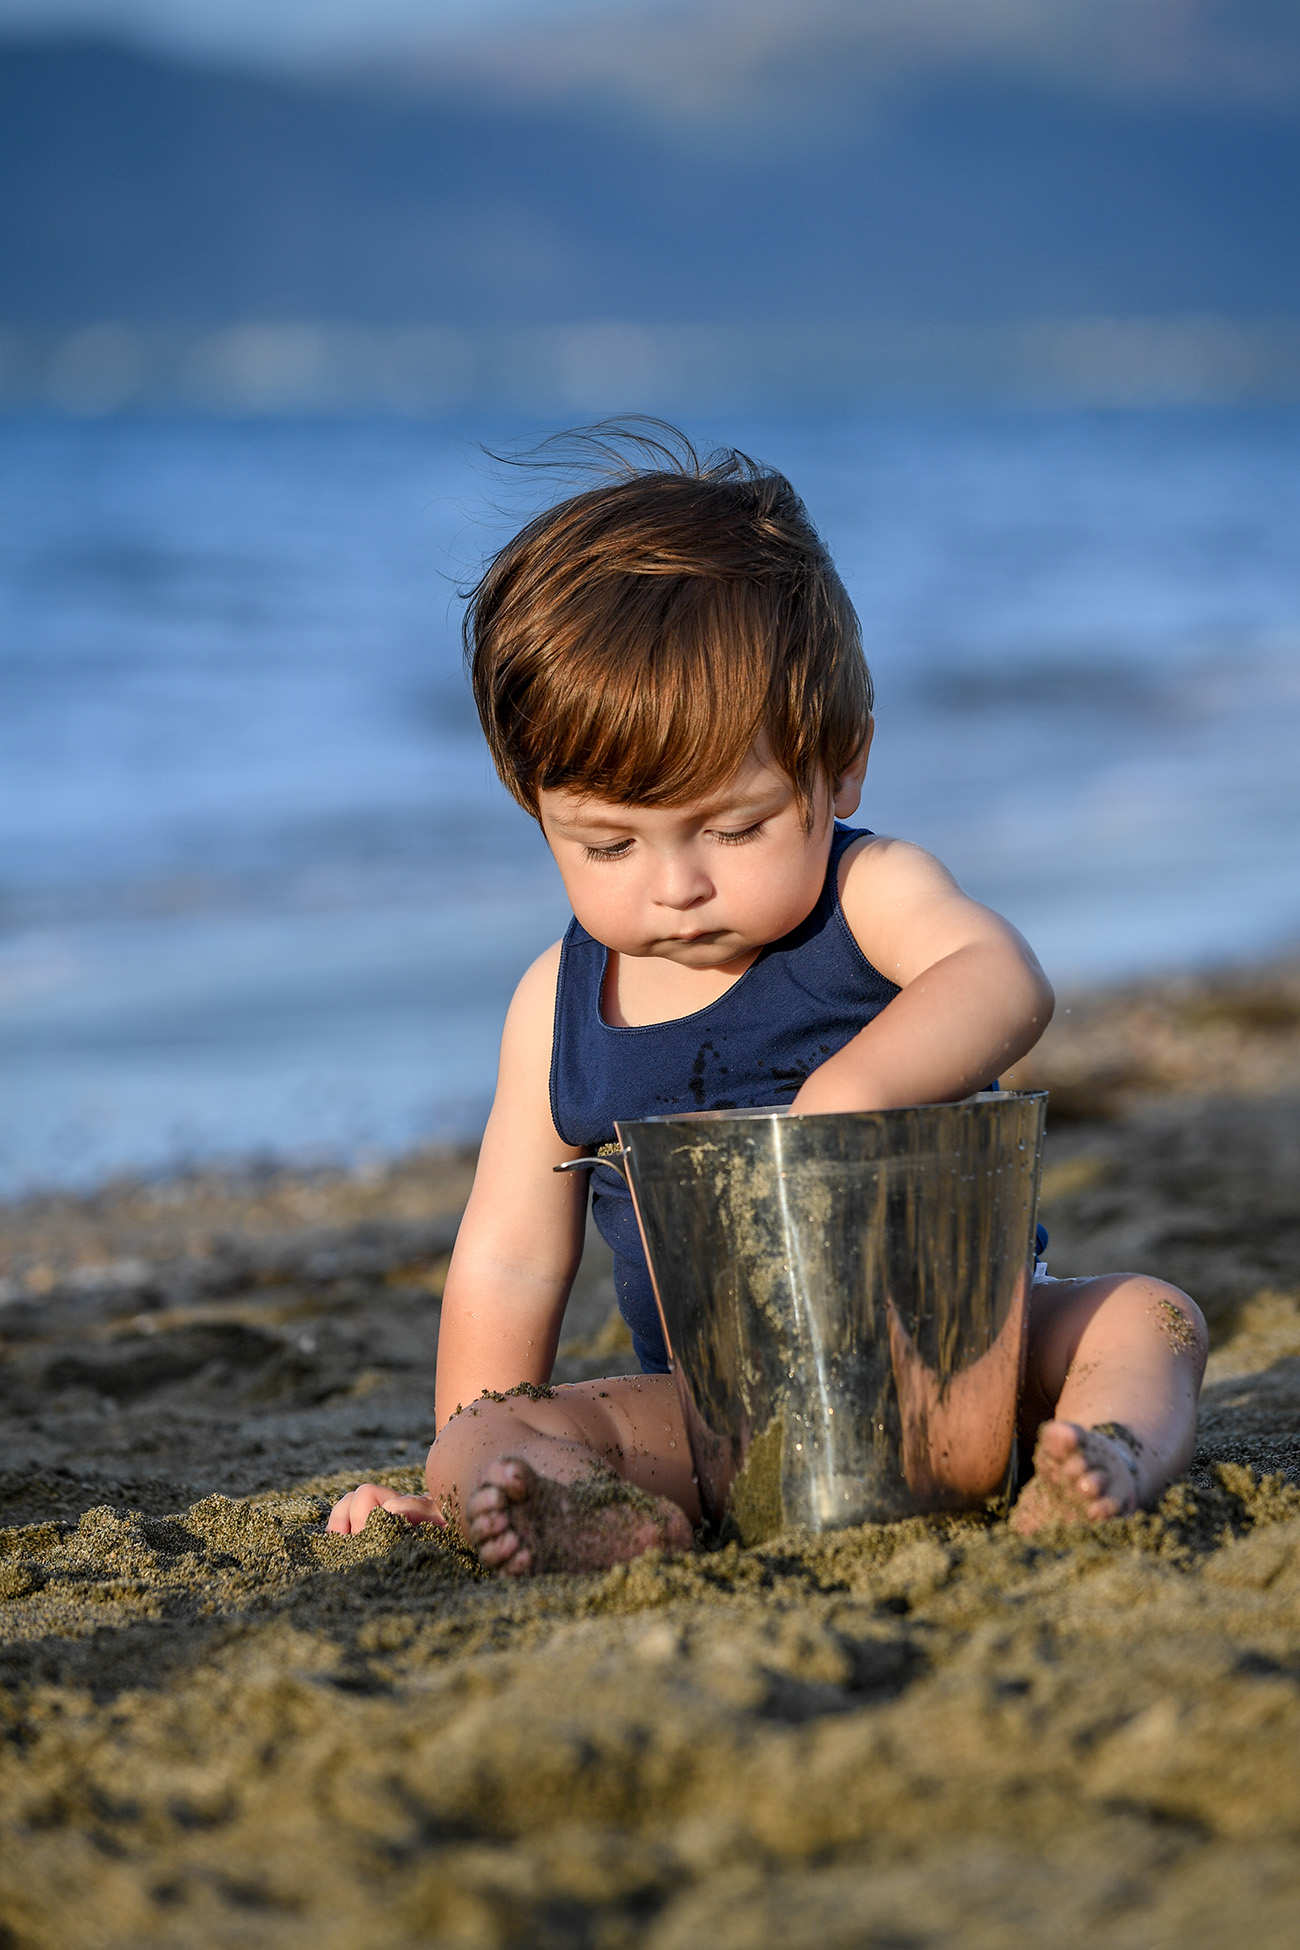 A baby plays around with sand in a bucket at the beach